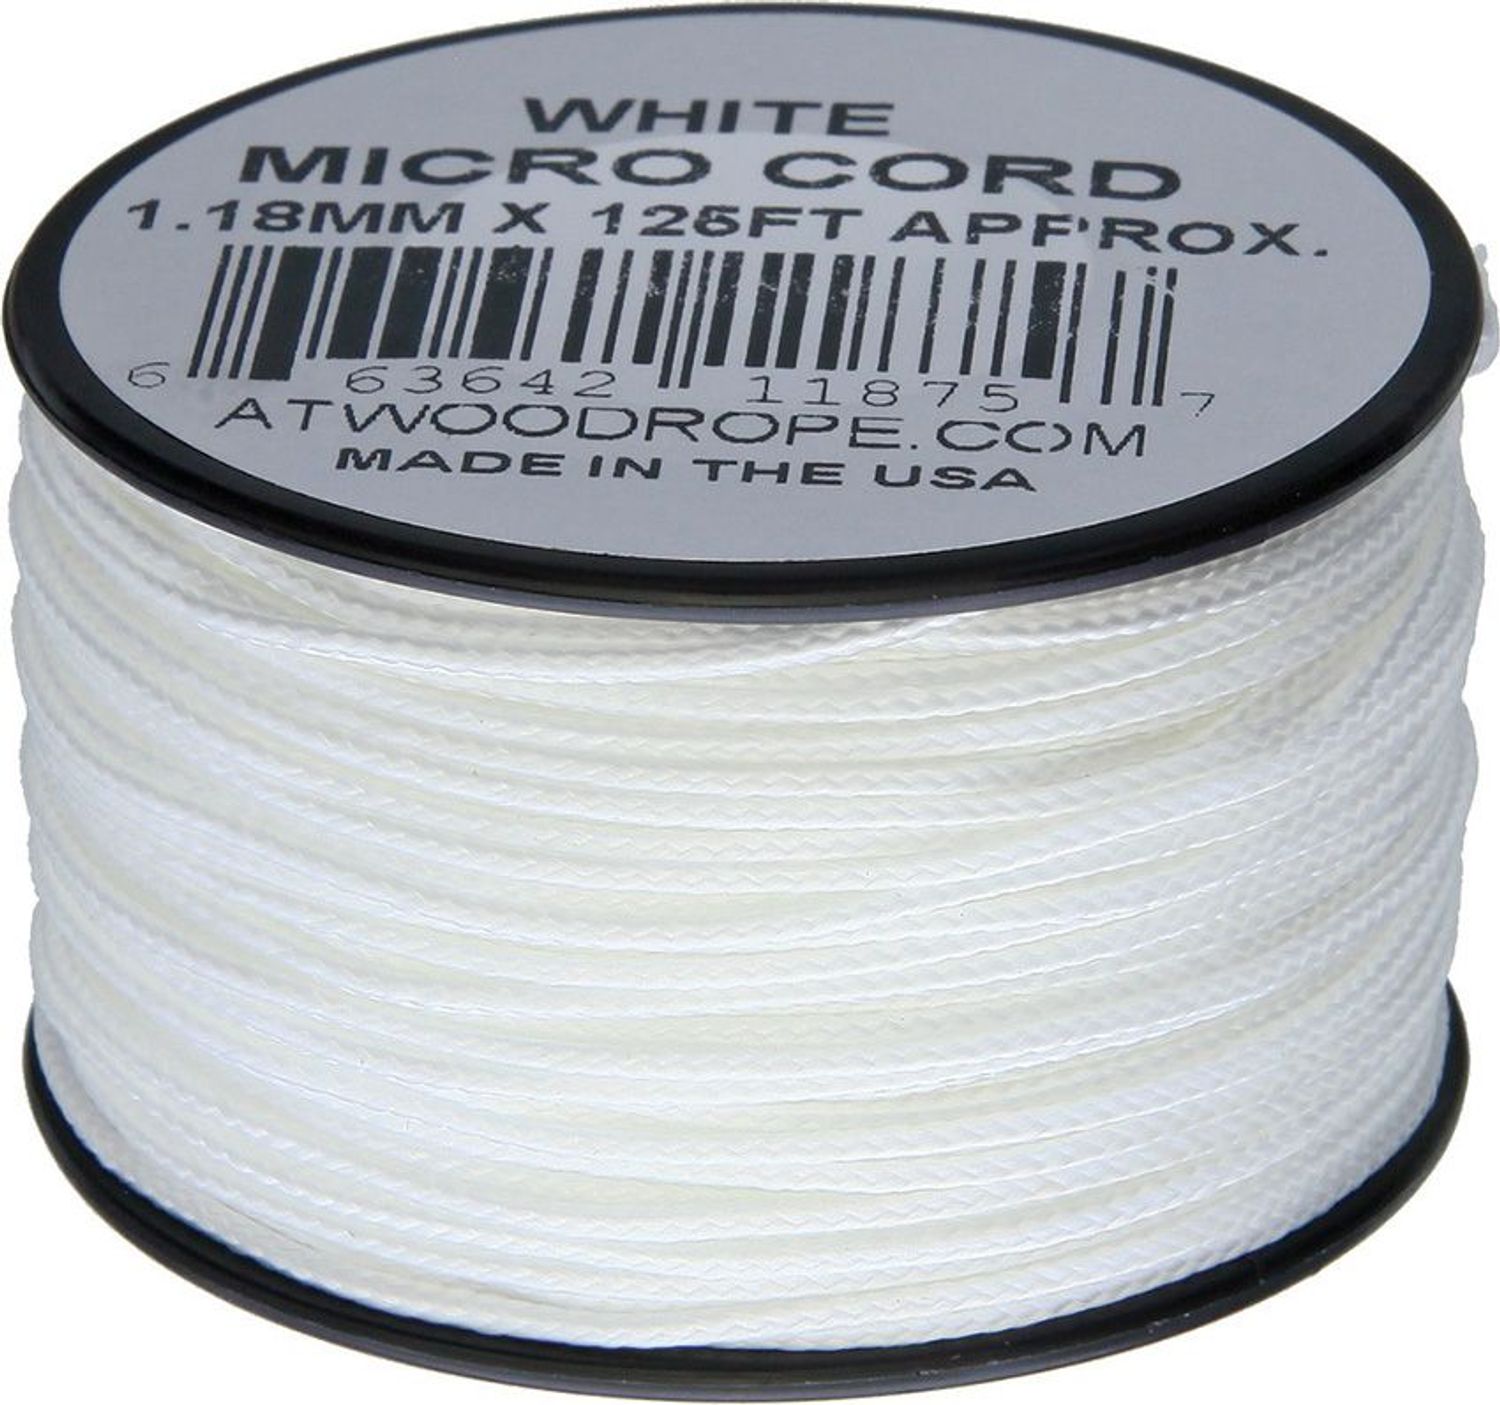 Atwood Rope Micro Cord, White, 125 Feet - KnifeCenter - RG1274